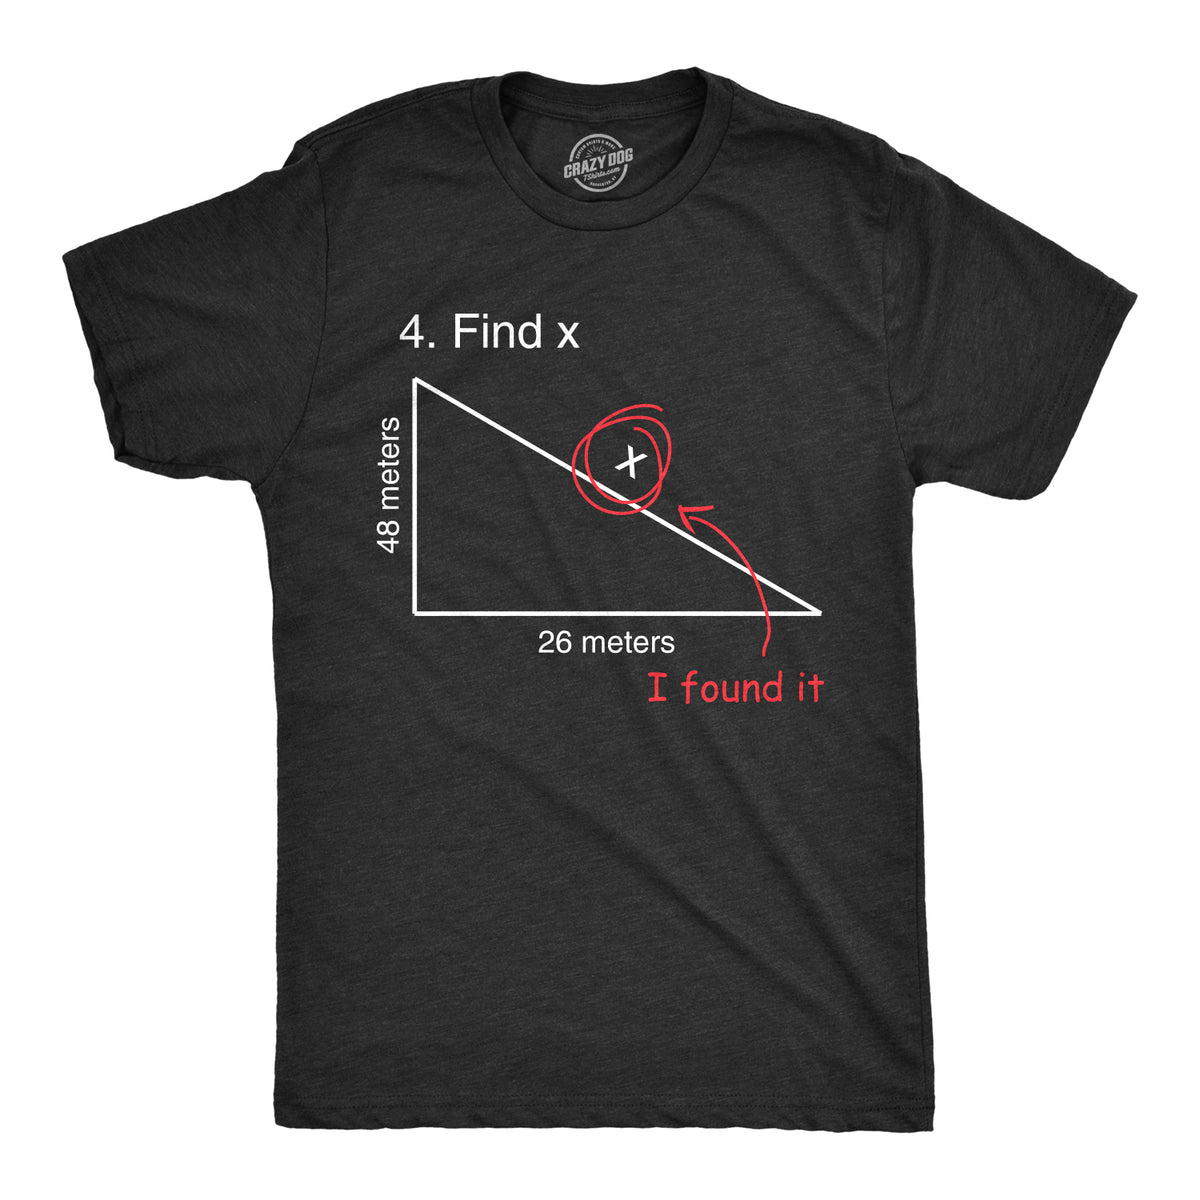 Funny Heather Black - Find X Find X Mens T Shirt Nerdy Science Tee